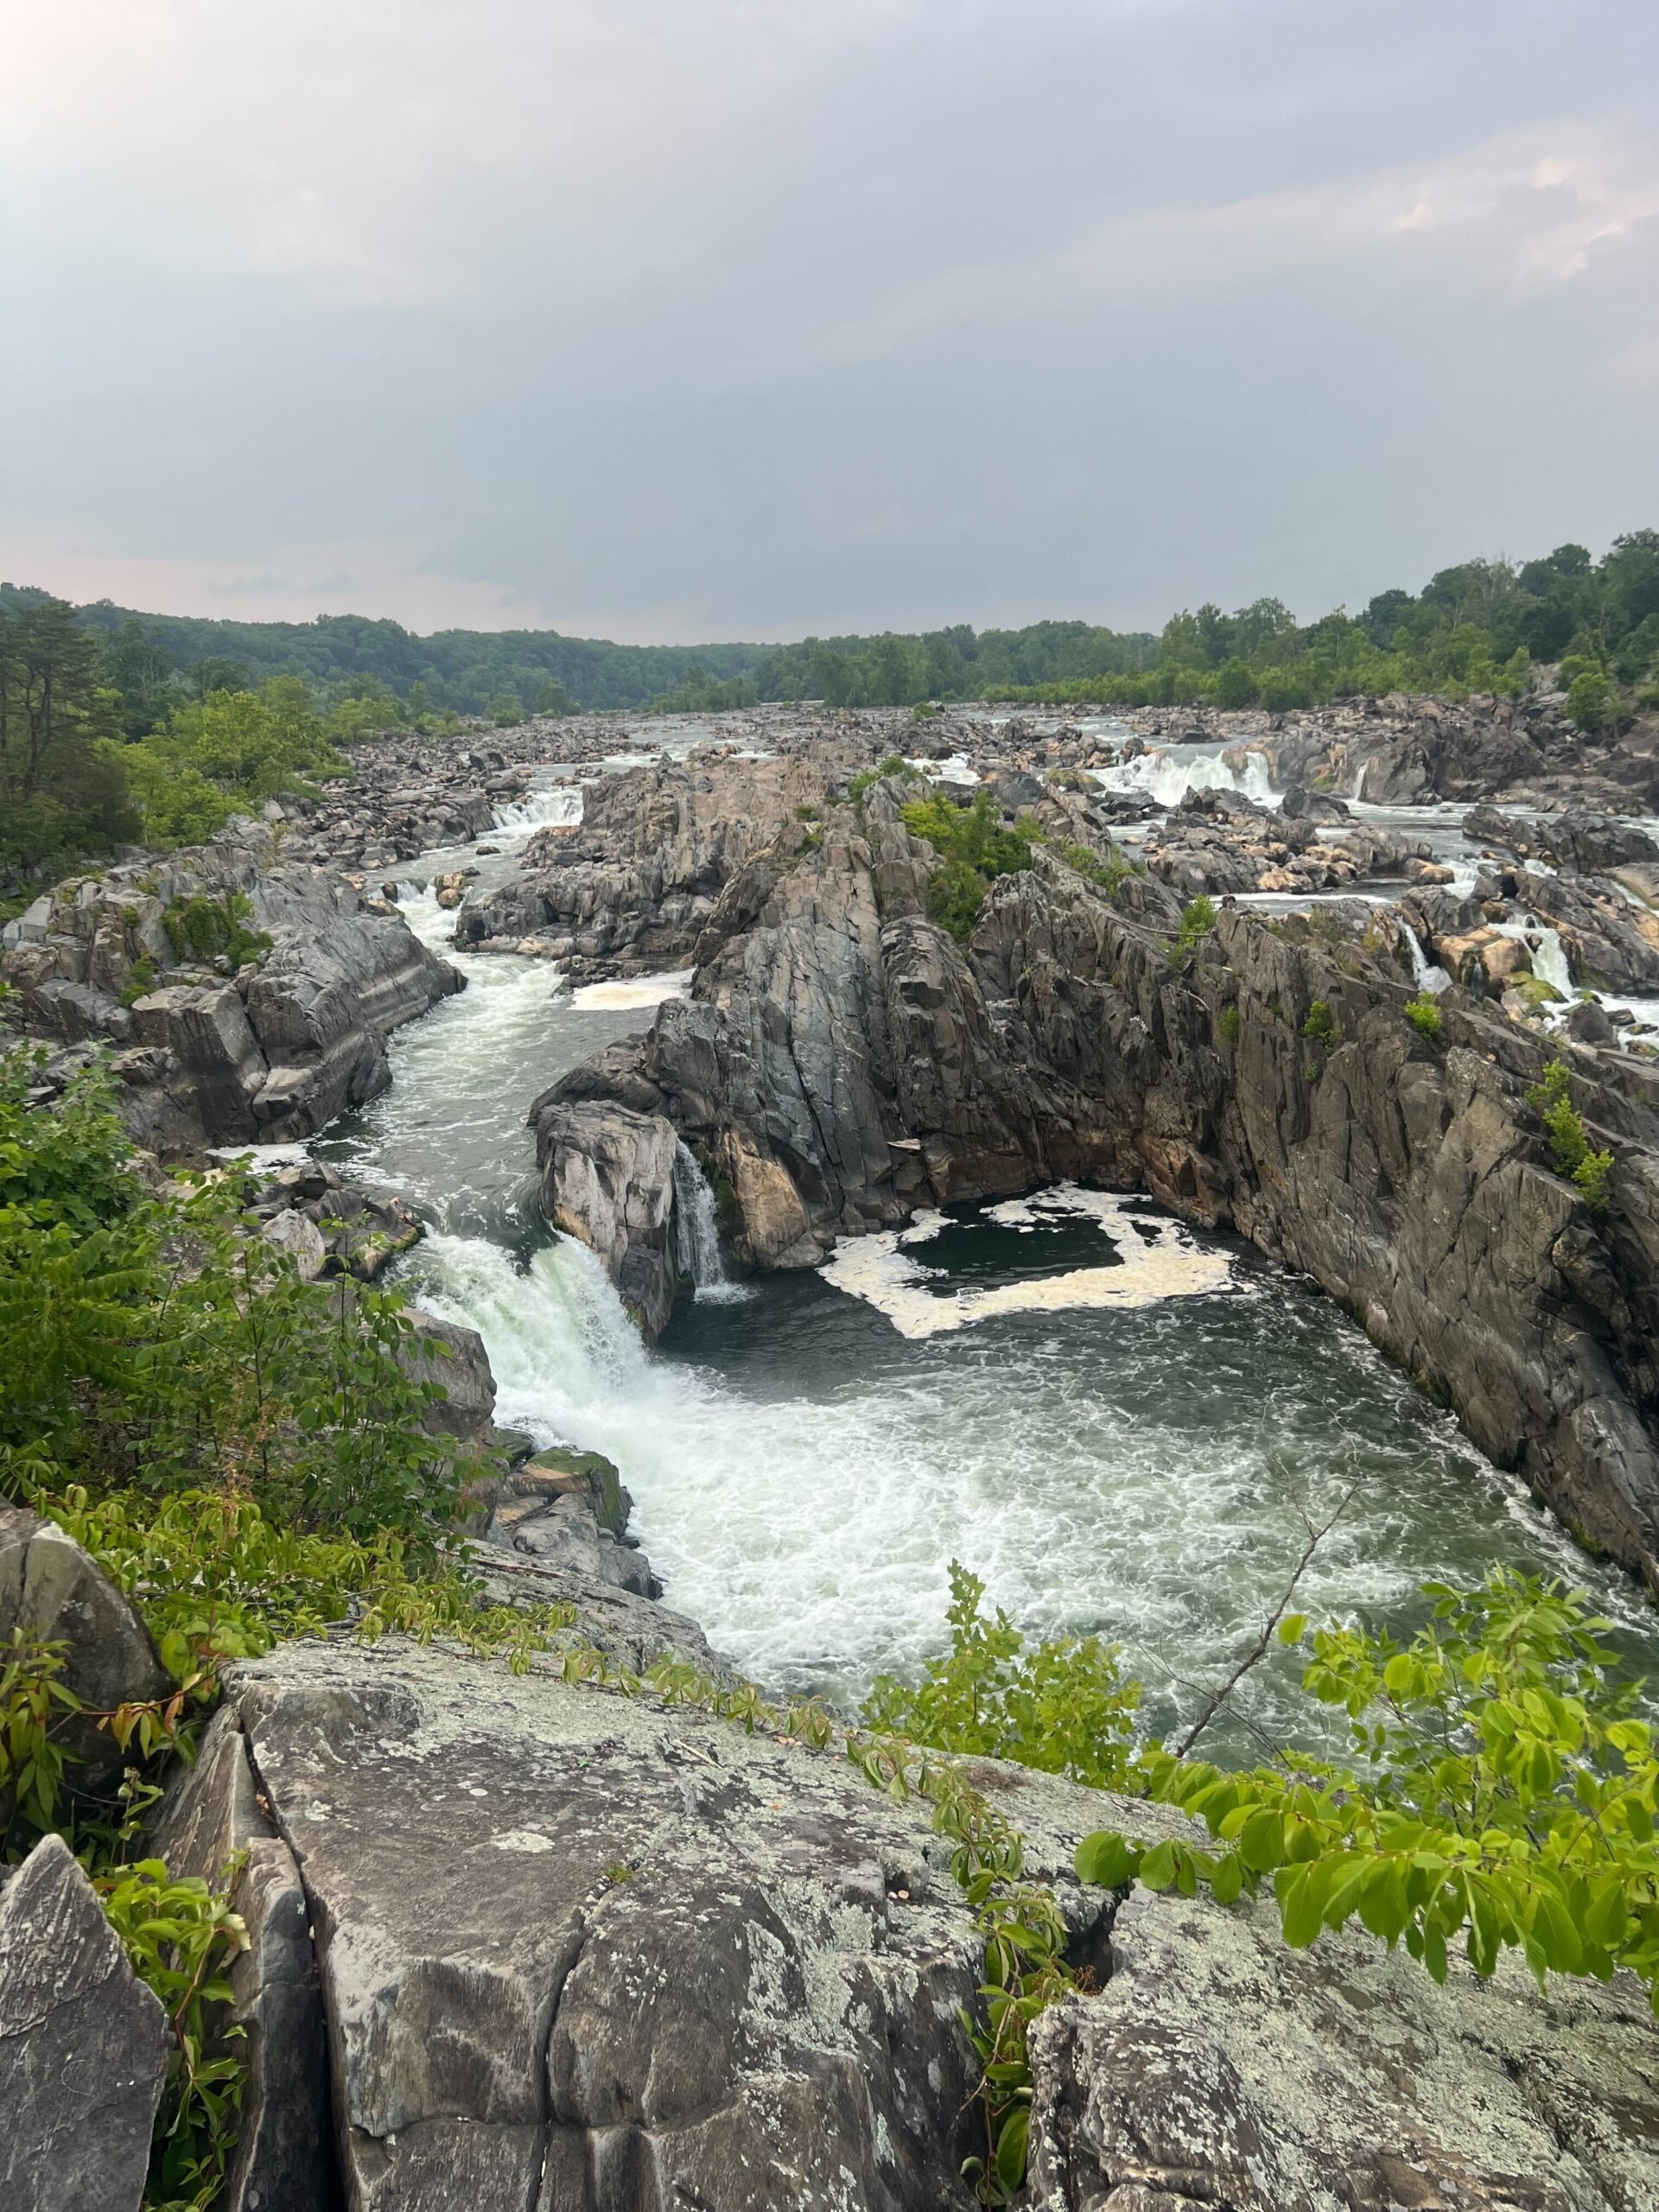 The sound of cascading water creates a serene ambiance at Great Falls. (Mariam Bukhari/Capital News Service)